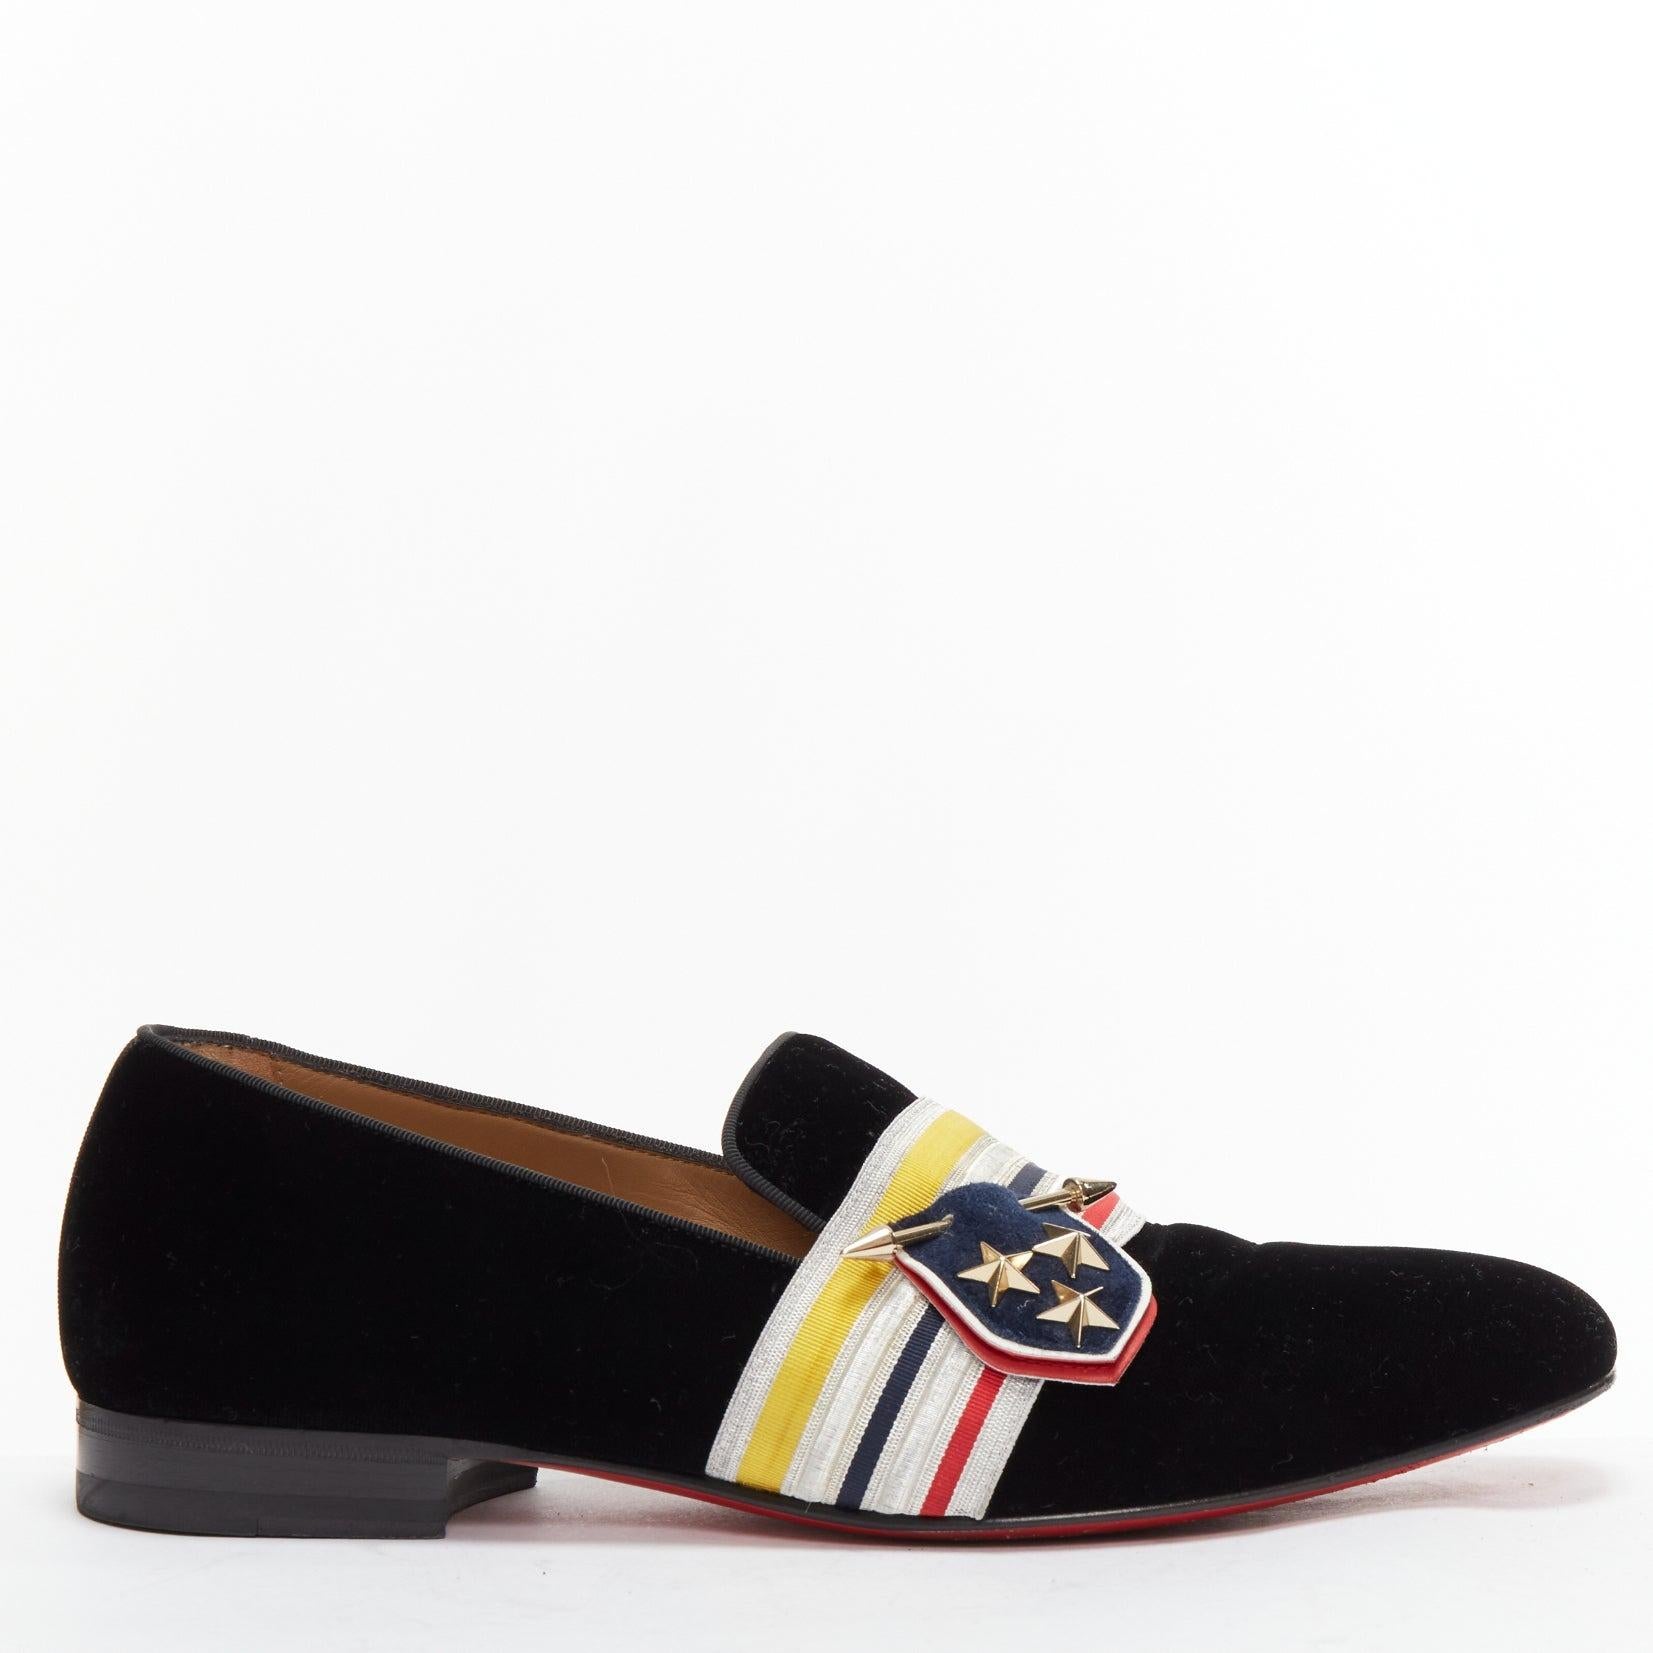 CHRISTIAN LOUBOUTIN St Ordre black velvet silver star badge loafers EU43
Reference: JSLE/A00085
Brand: Christian Louboutin
Model: St Ordre
Material: Velour, Fabric
Color: Black, Multicolour
Pattern: Solid
Closure: Slip On
Lining: Nude Leather
Extra